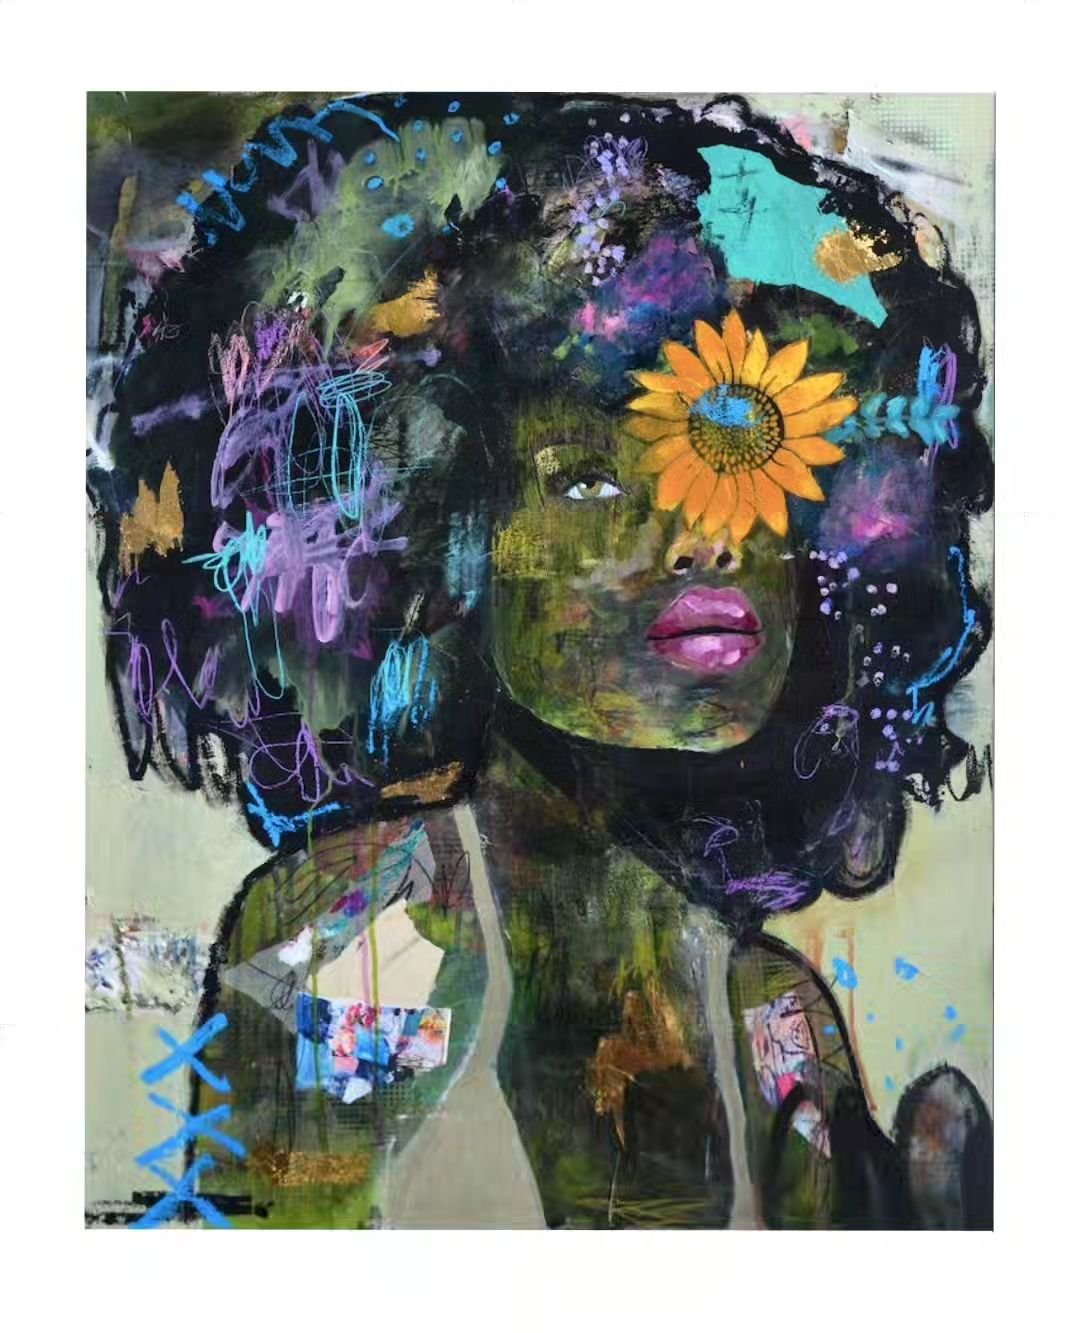 I AM &quot;A Ray of Sunshine&quot; and I AM &quot;Flourishing&quot; was selected for GPEC's upcoming art exhibition. Exciting! Thank you @greaterphx !